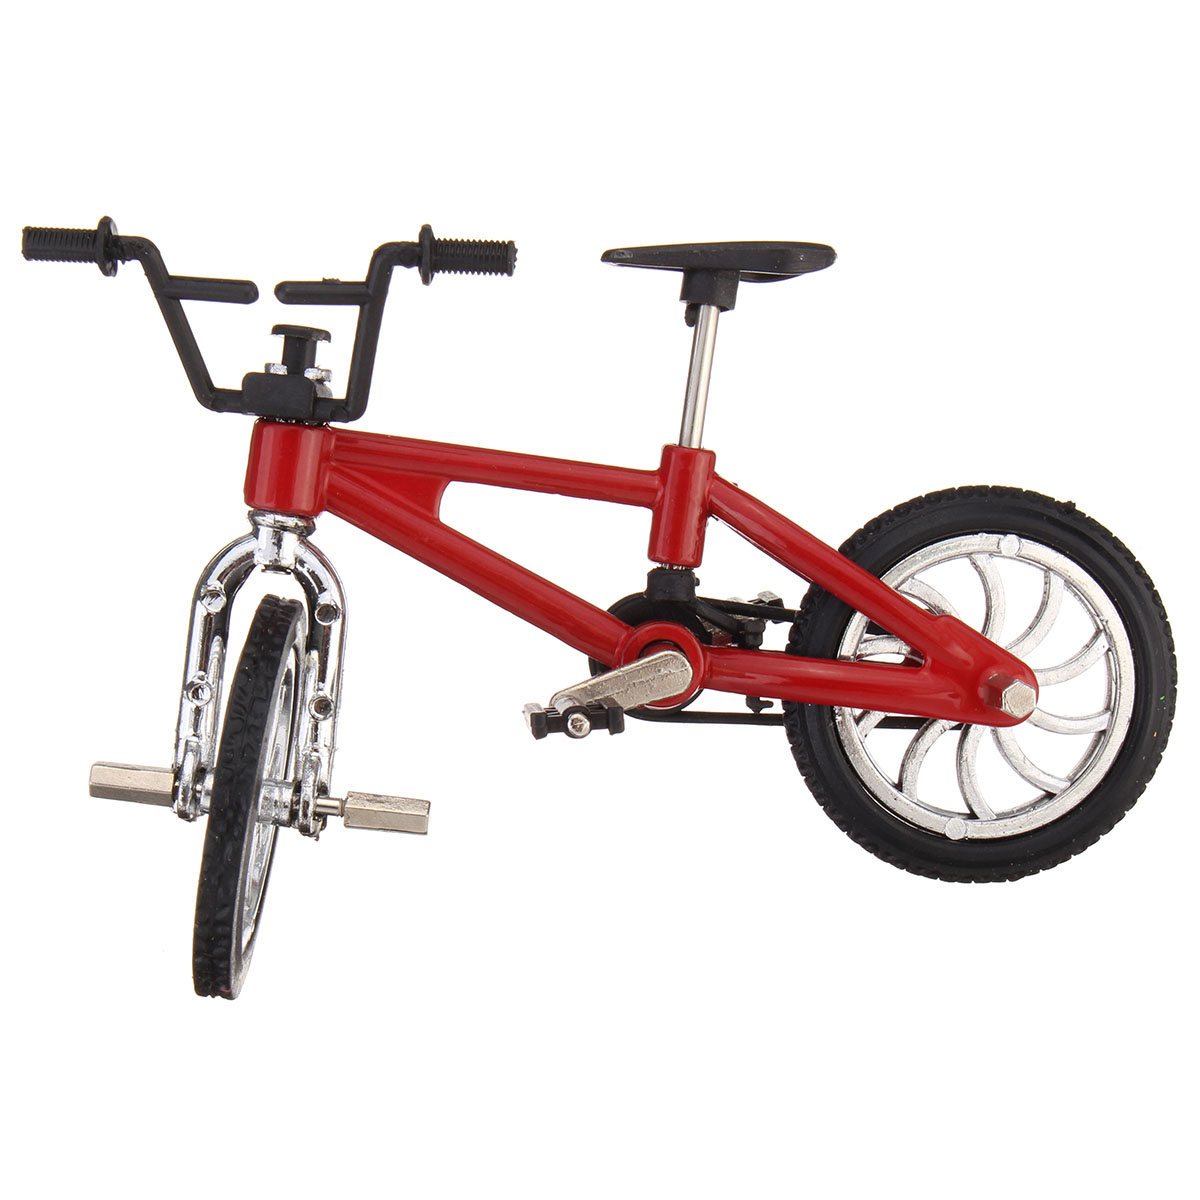 Cool-Finger-Alloy-Bicycle-Set-Children-Kid-Model-Rare-Small-Mini-Toy-1122655